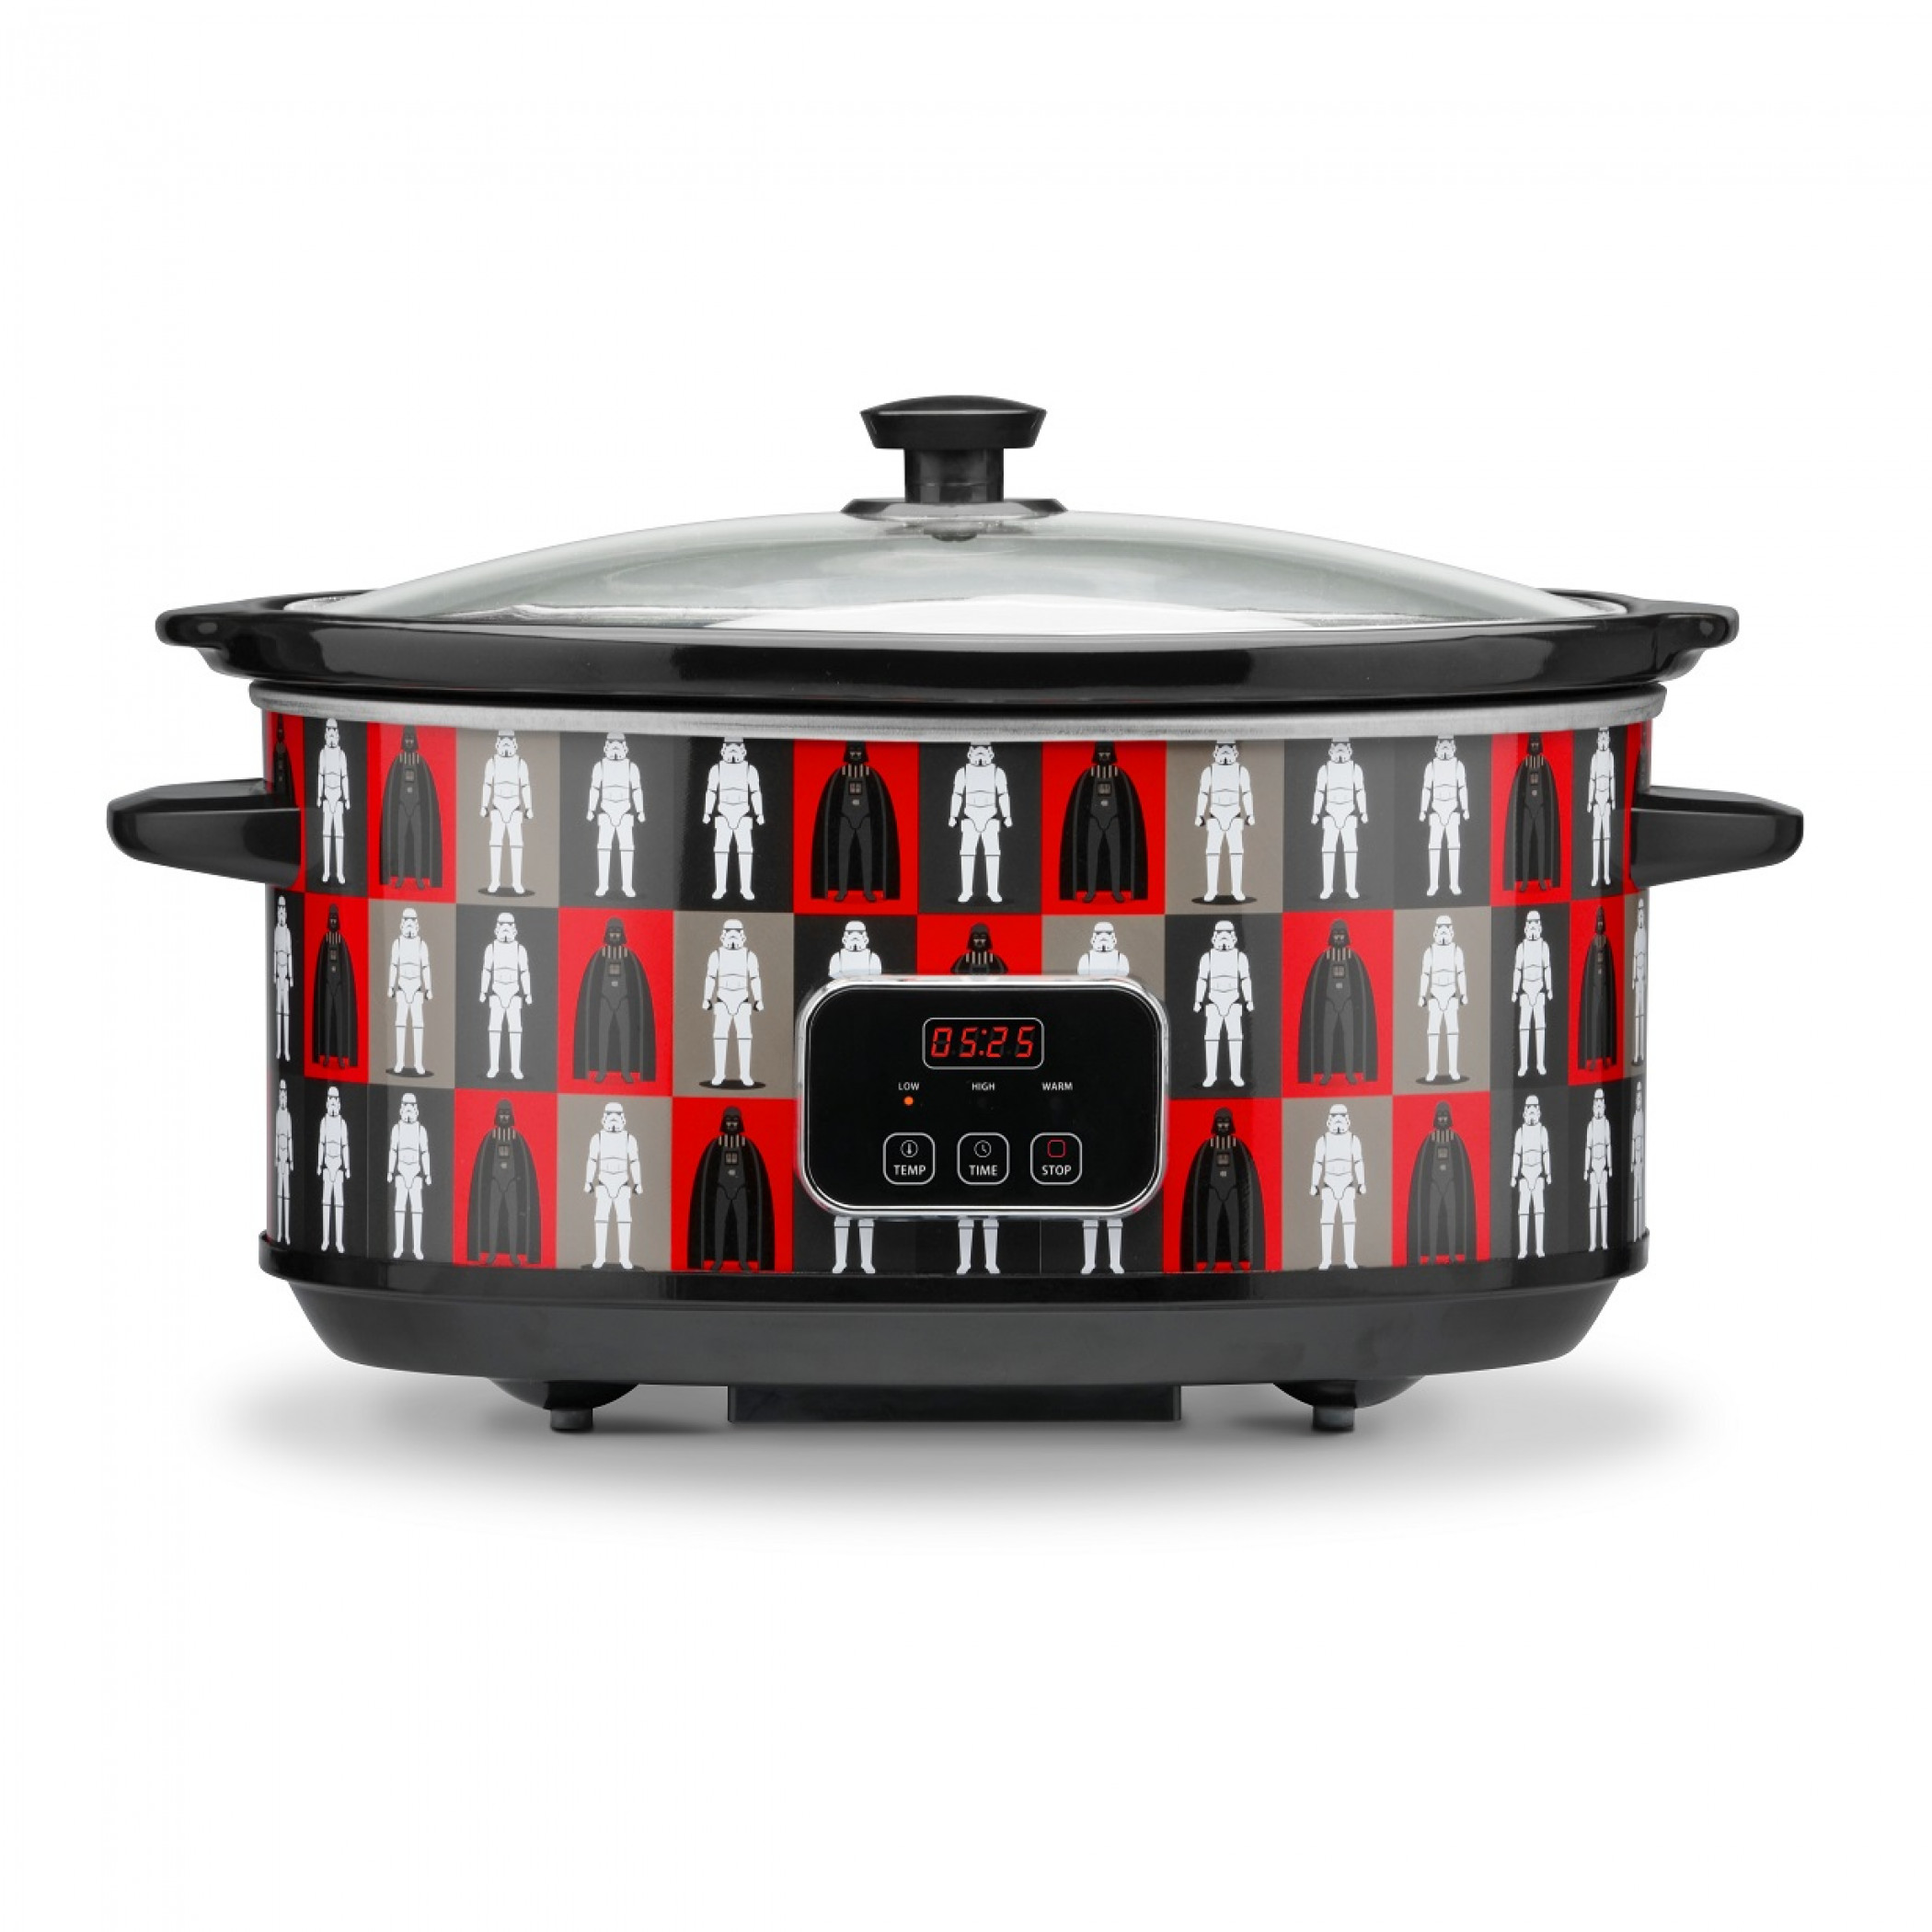 Star Wars 7-Quart Slow Cooker with Sound